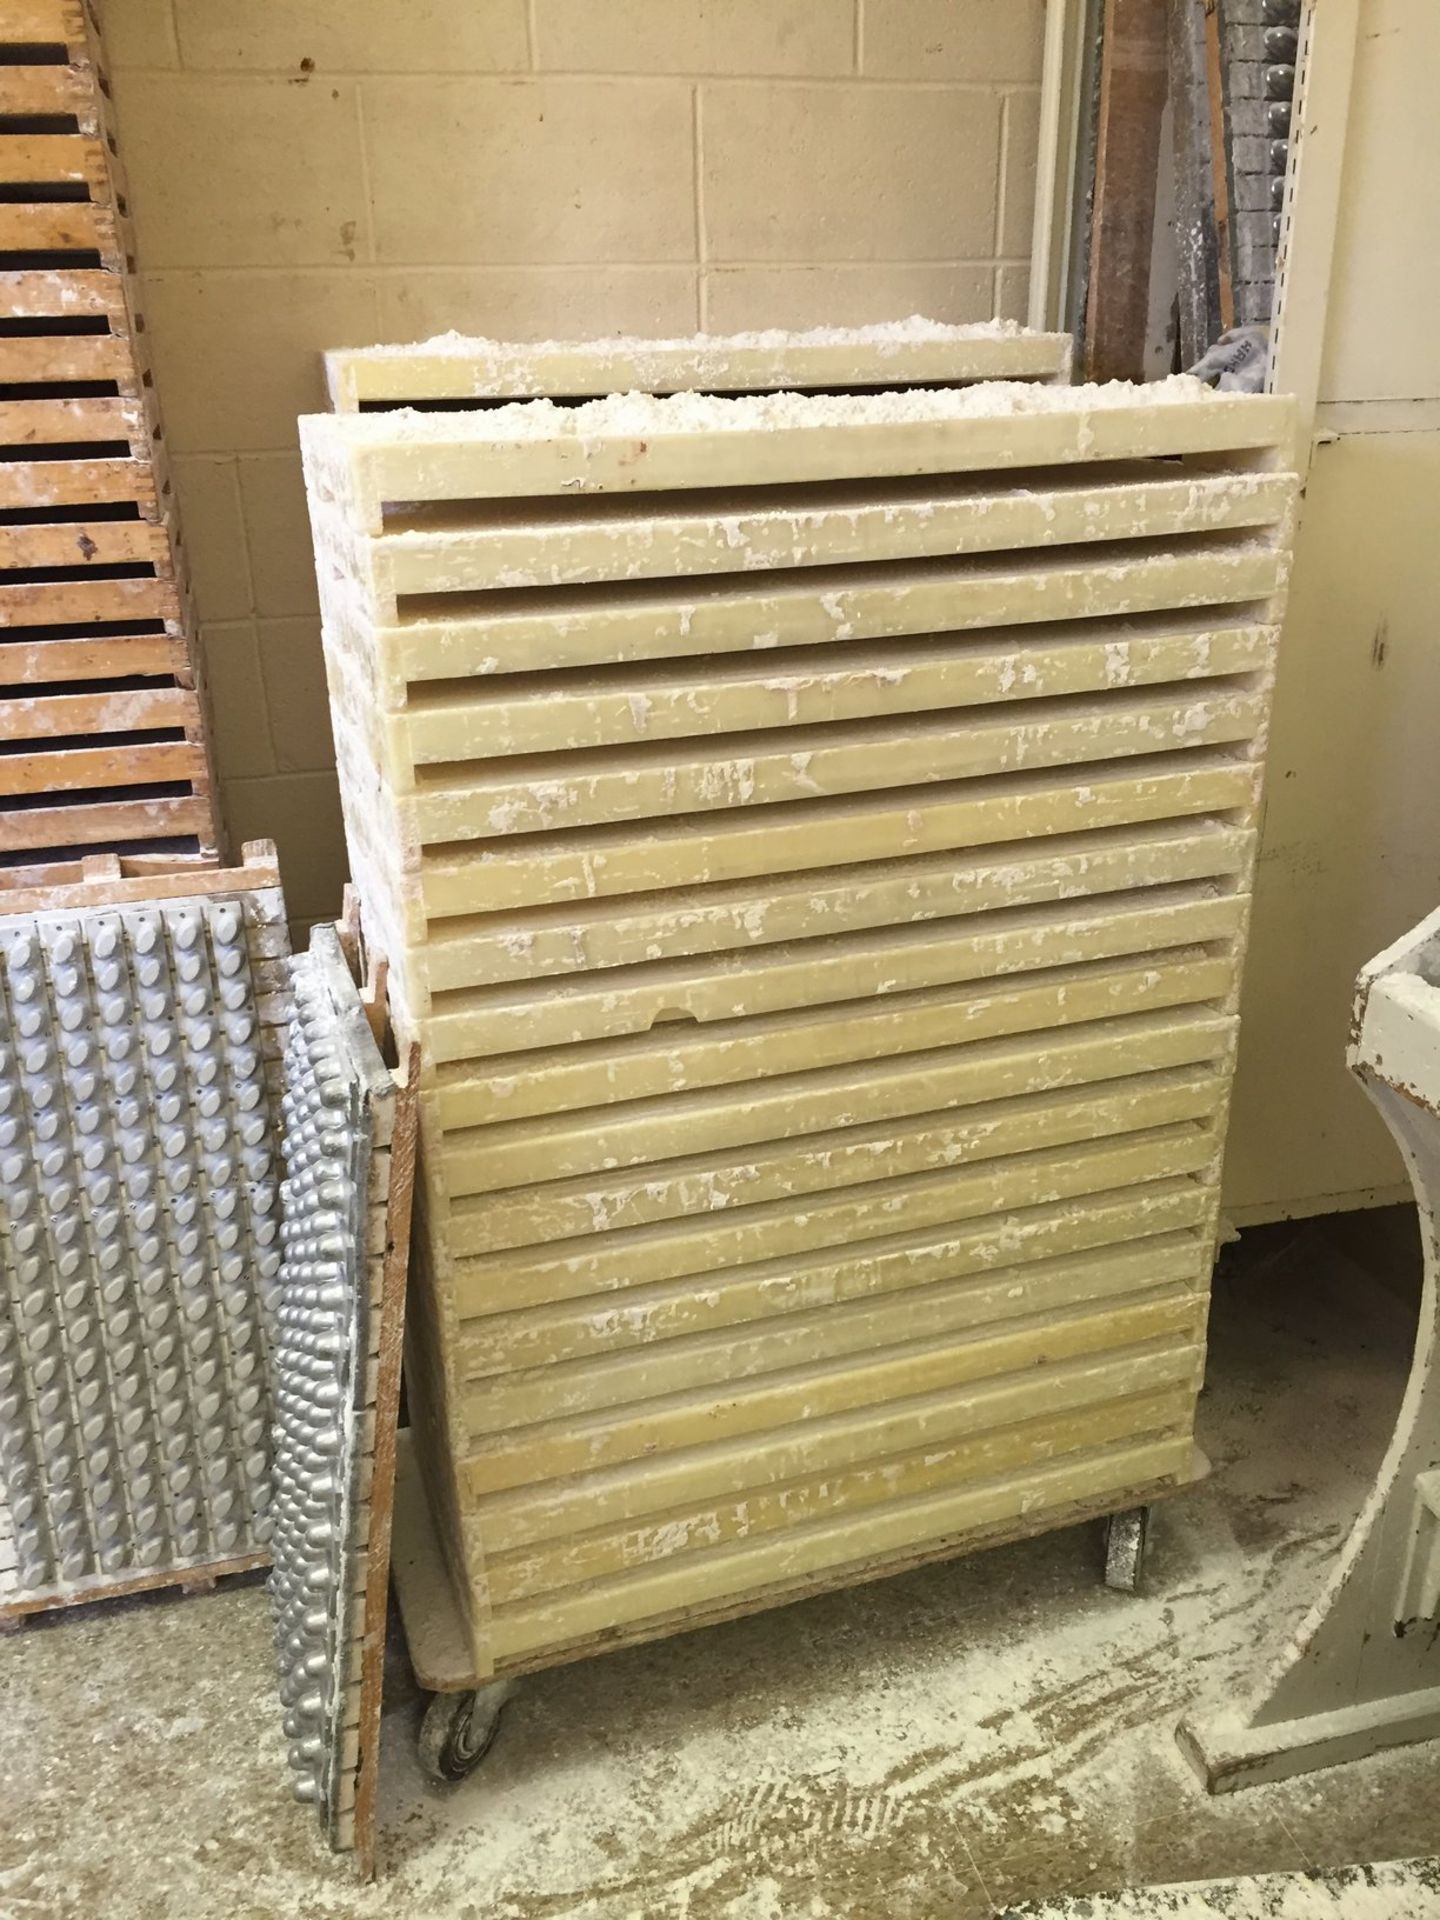 Approx. 150 plastic trays. 32" x 15.5" outside dims. 30.5" x 14.5" x 1.25" deep inside dims. - Image 2 of 3